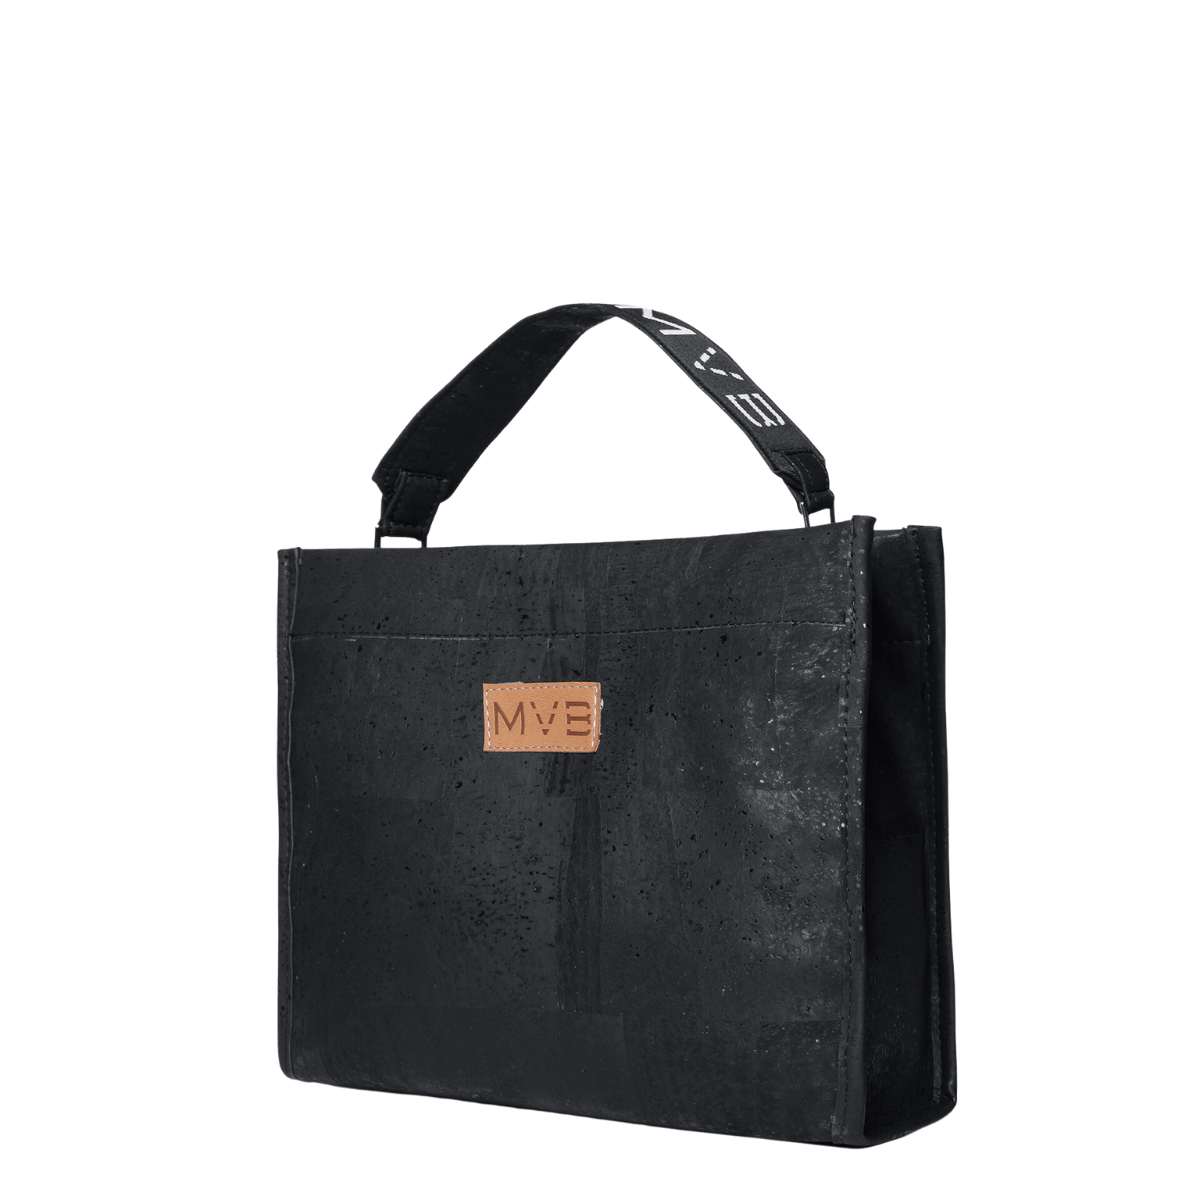 The vegan tote carry-all bag